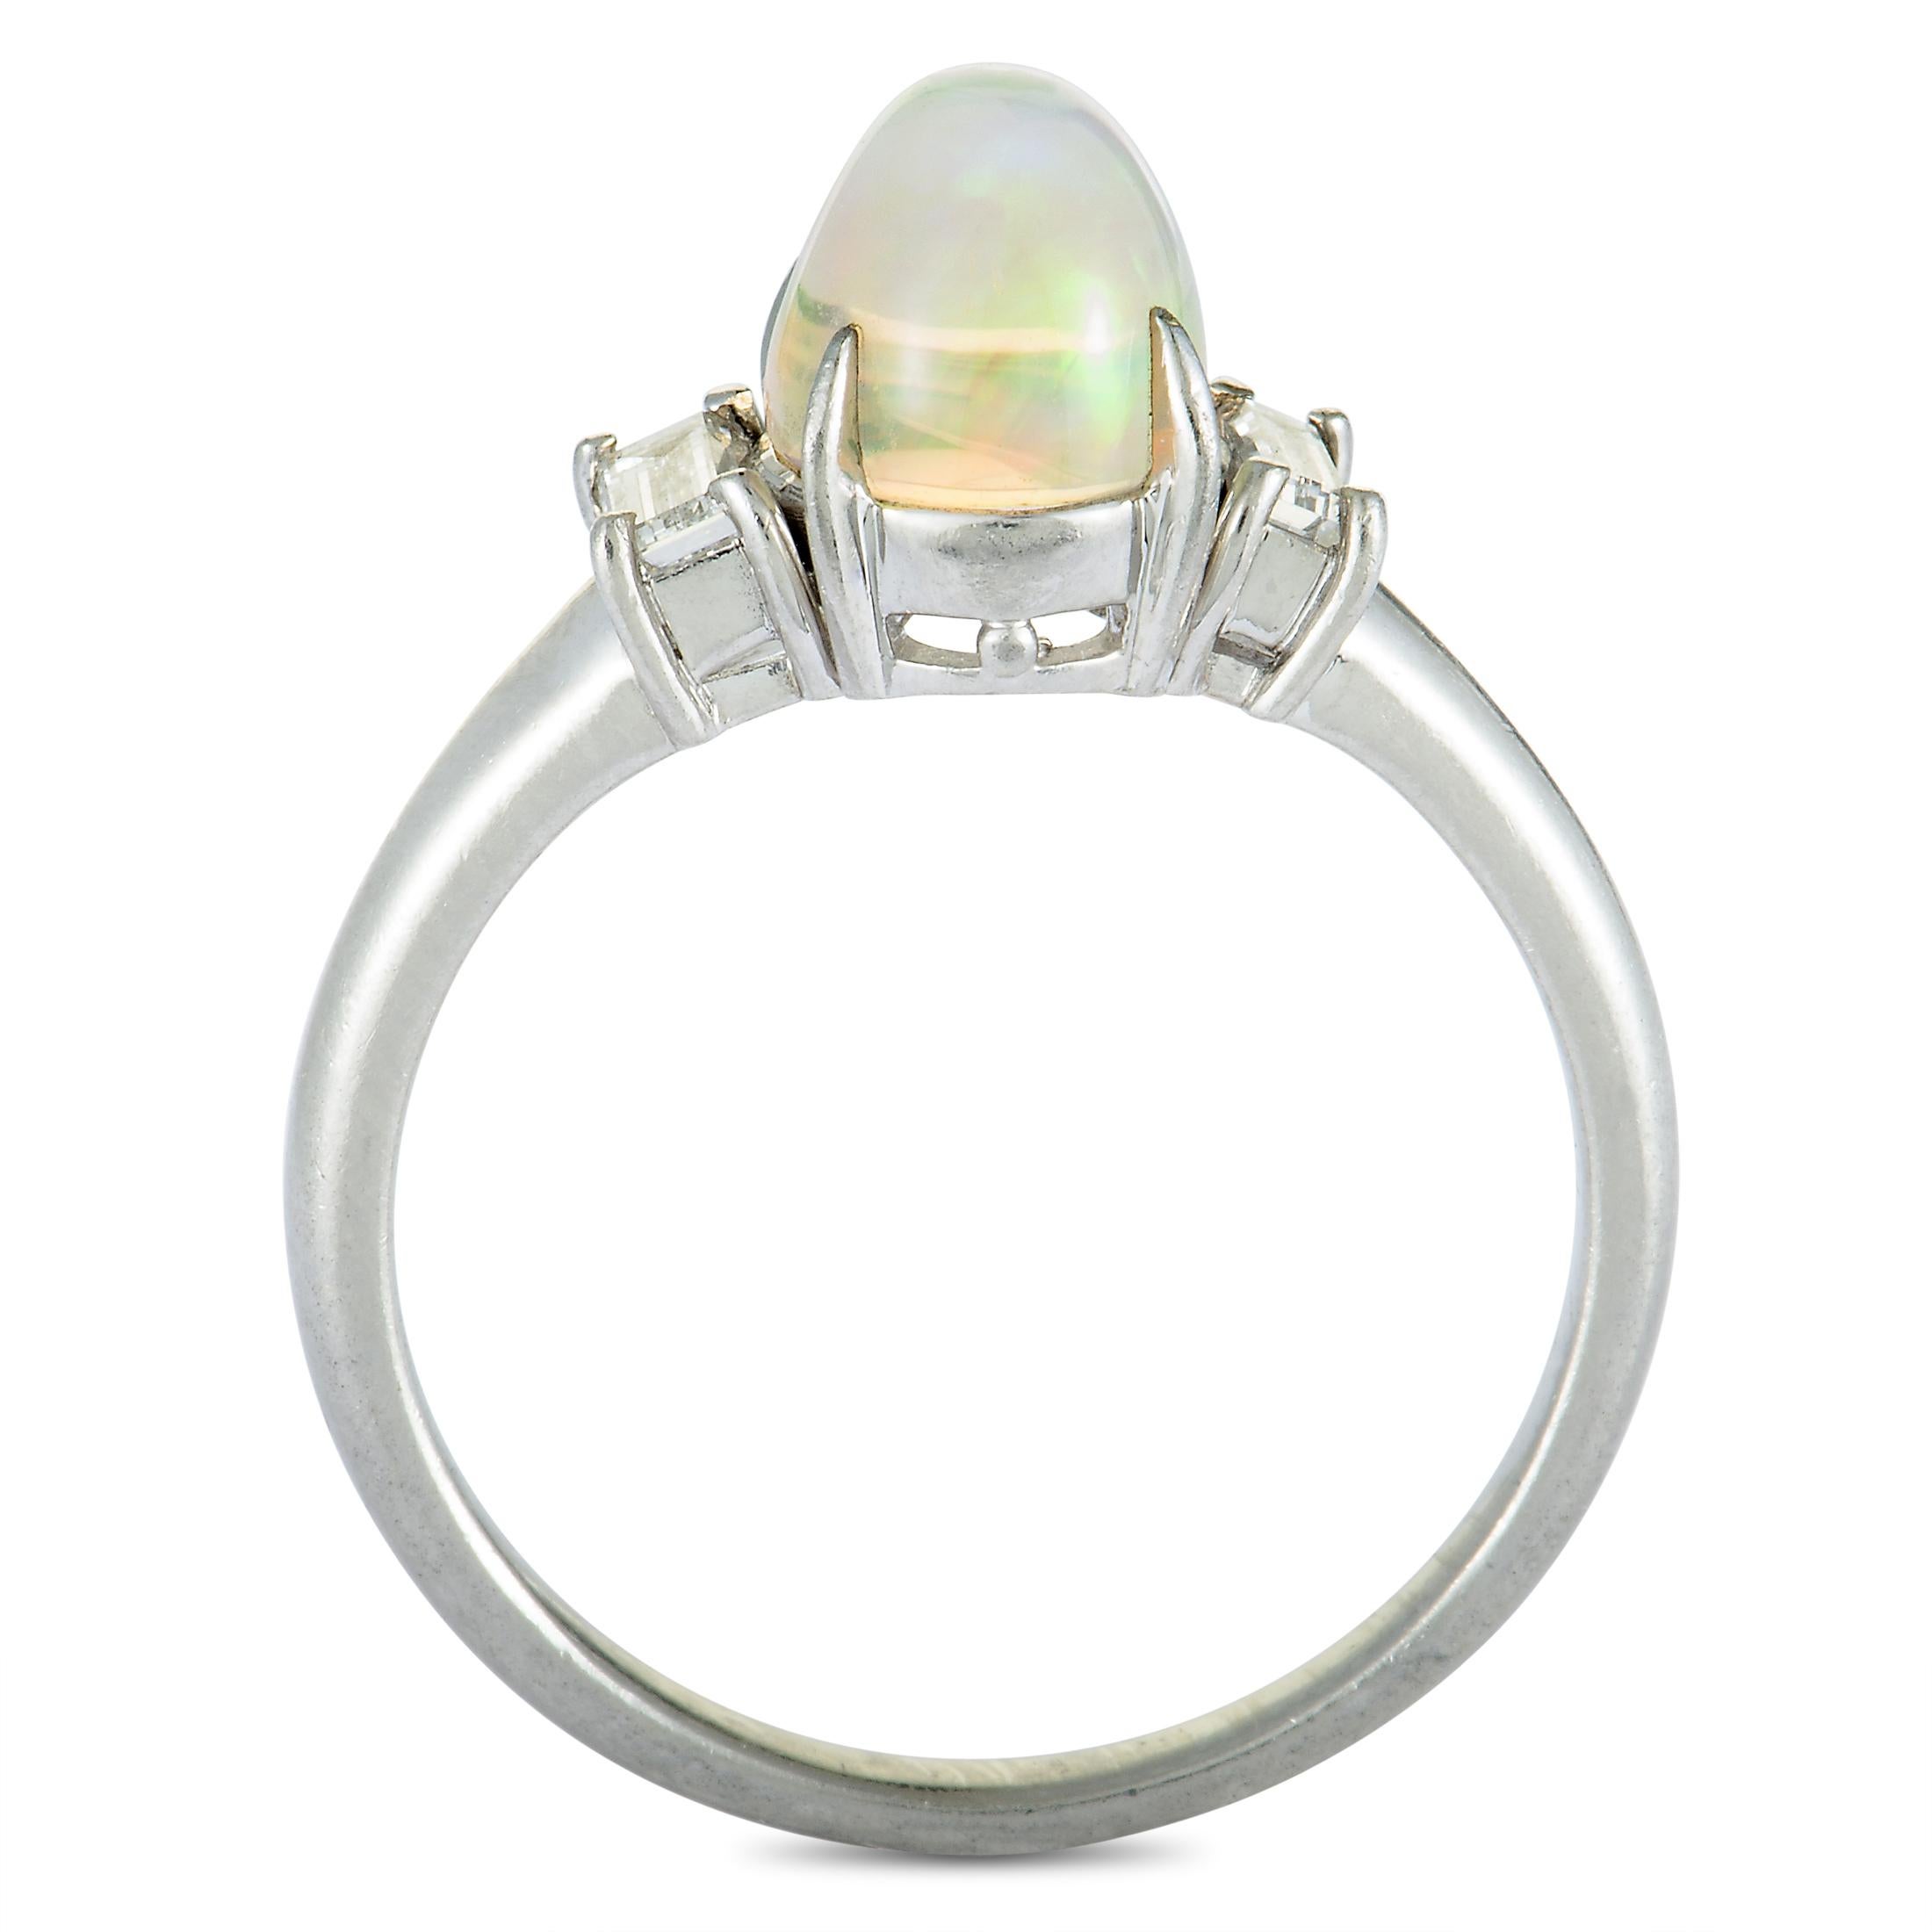 A harmonious fusion of elegant platinum and sublime gems, this fascinating ring offers an exceptionally refined appearance. The ring is set with a gorgeous opal that weighs 1.82 carats and with superb diamonds that amount to 0.29 carats.
Ring Top